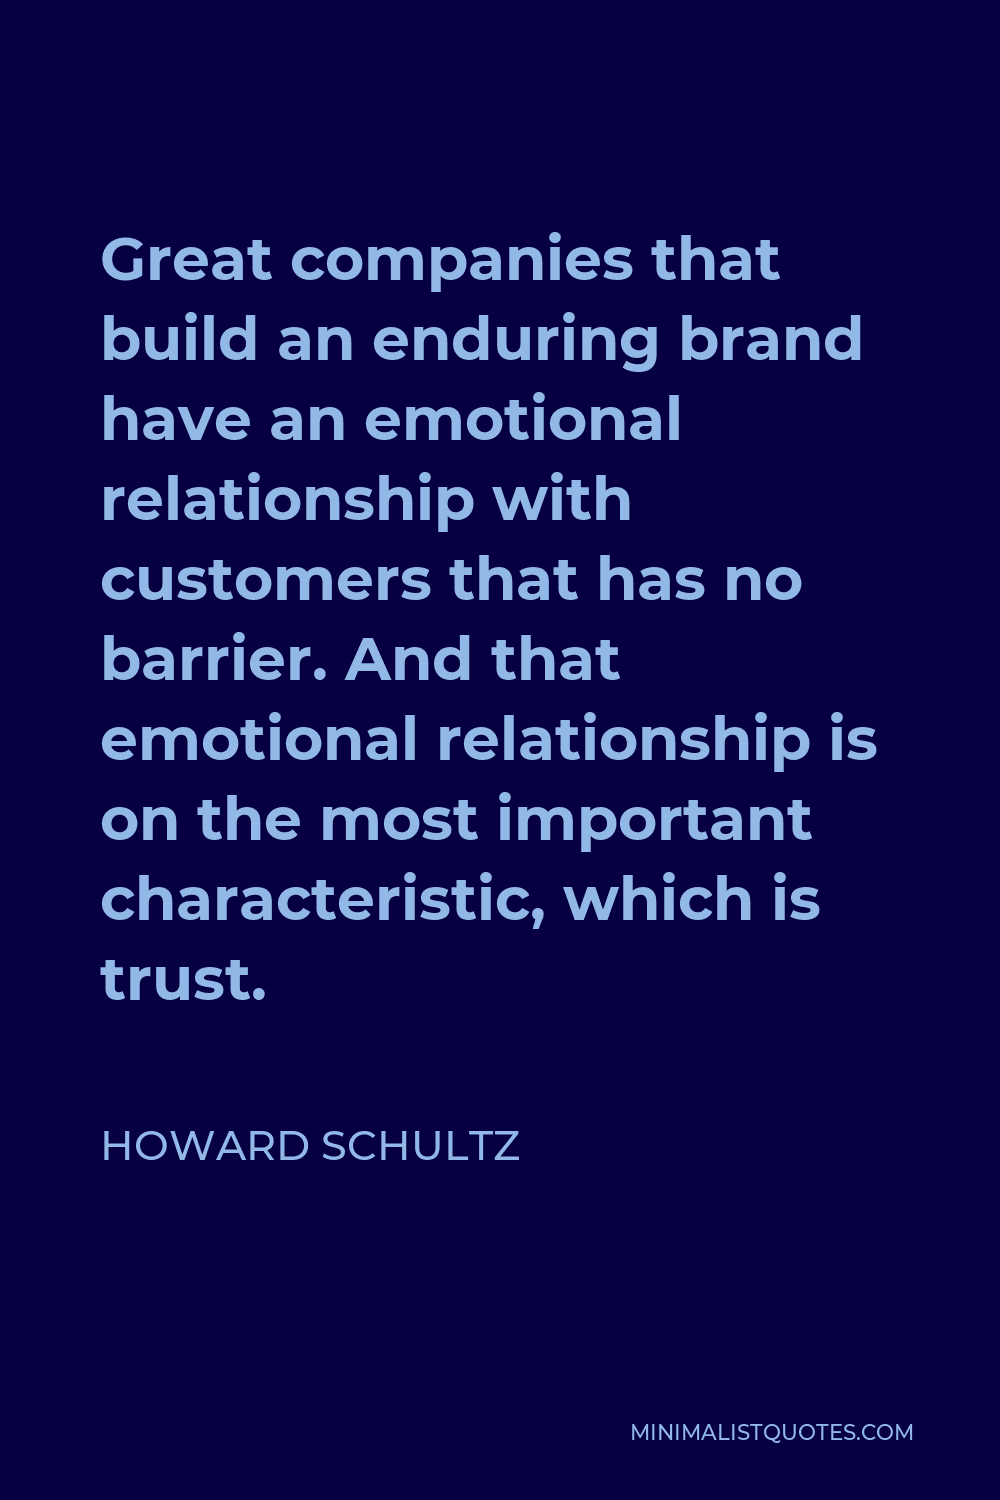 Howard Schultz Quote - Great companies that build an enduring brand have an emotional relationship with customers that has no barrier. And that emotional relationship is on the most important characteristic, which is trust.